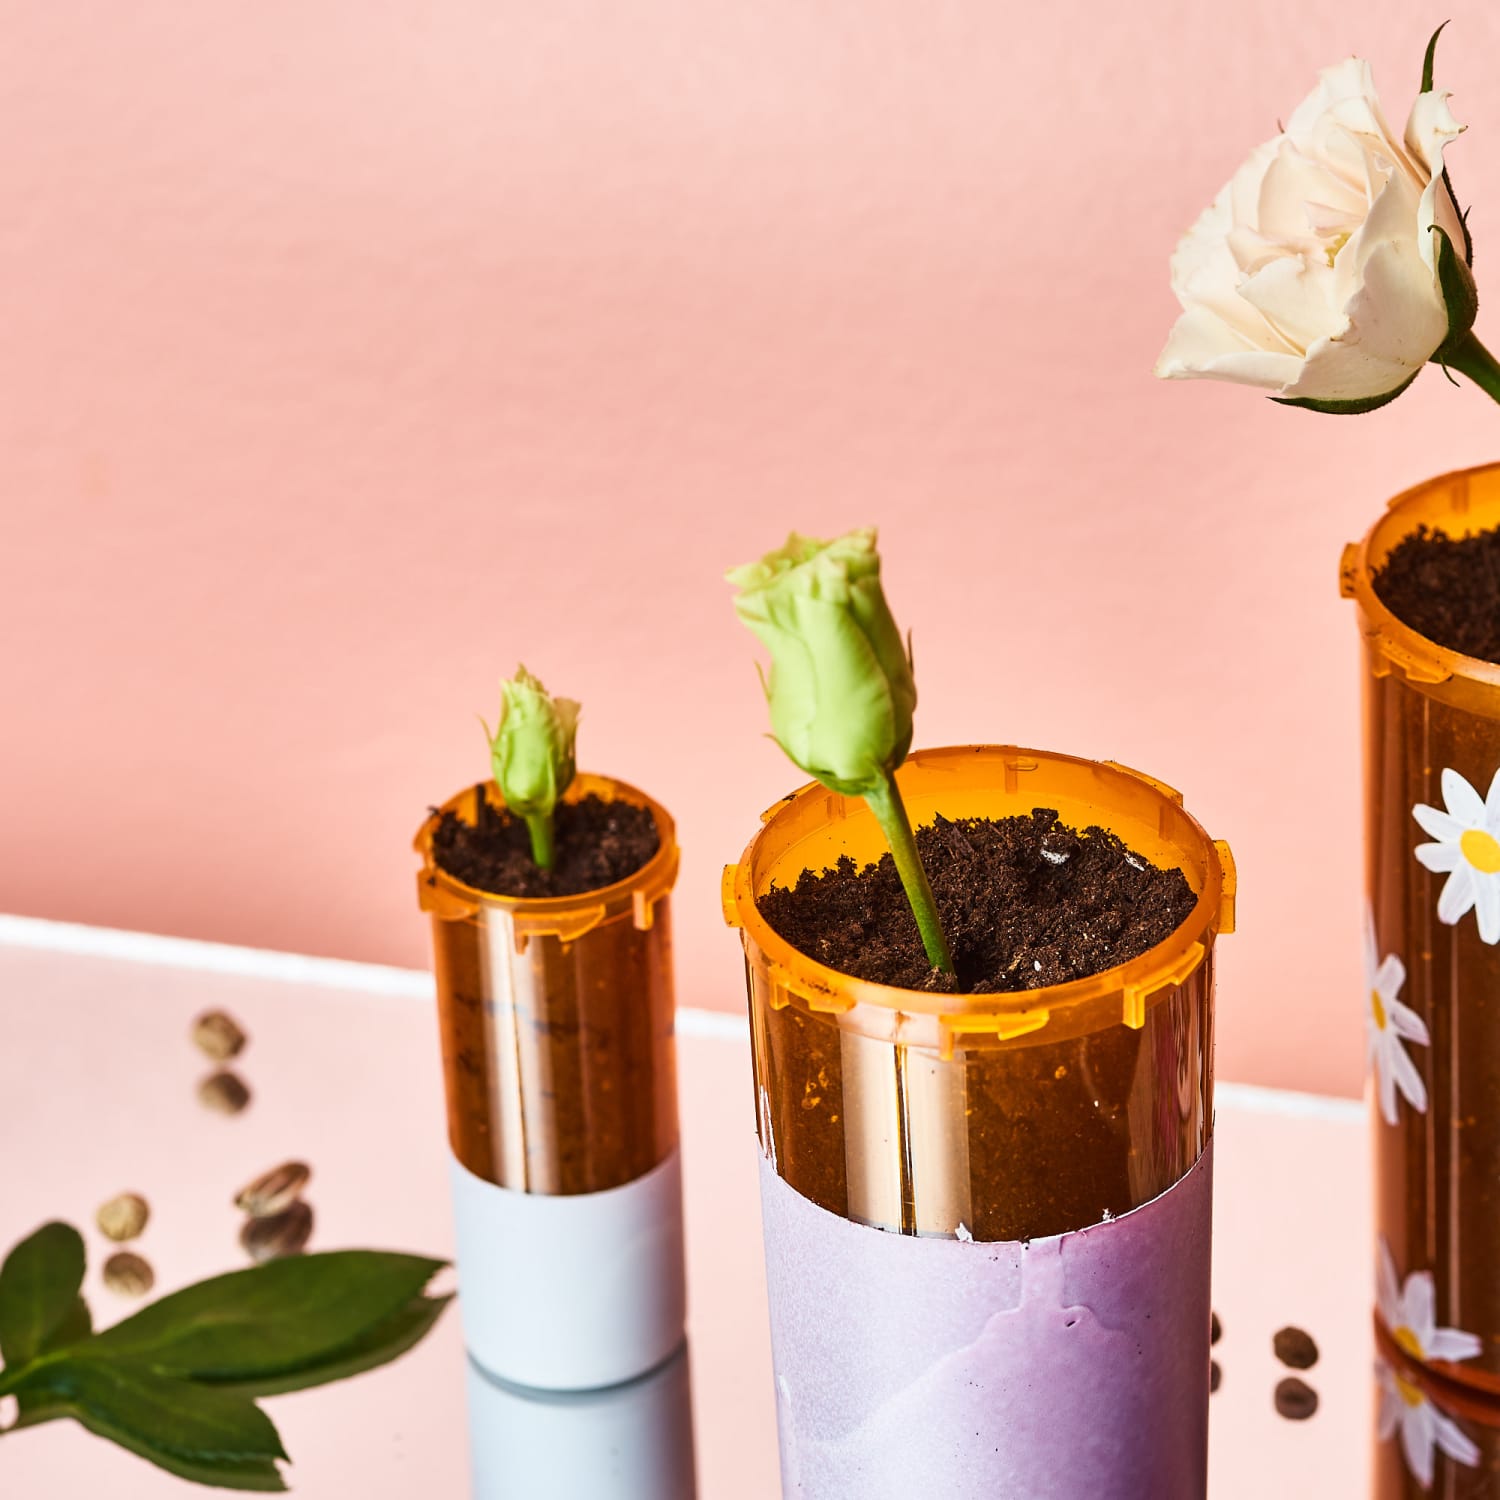 25 New Ways to Reuse and Recycle Your Old Pill Bottles